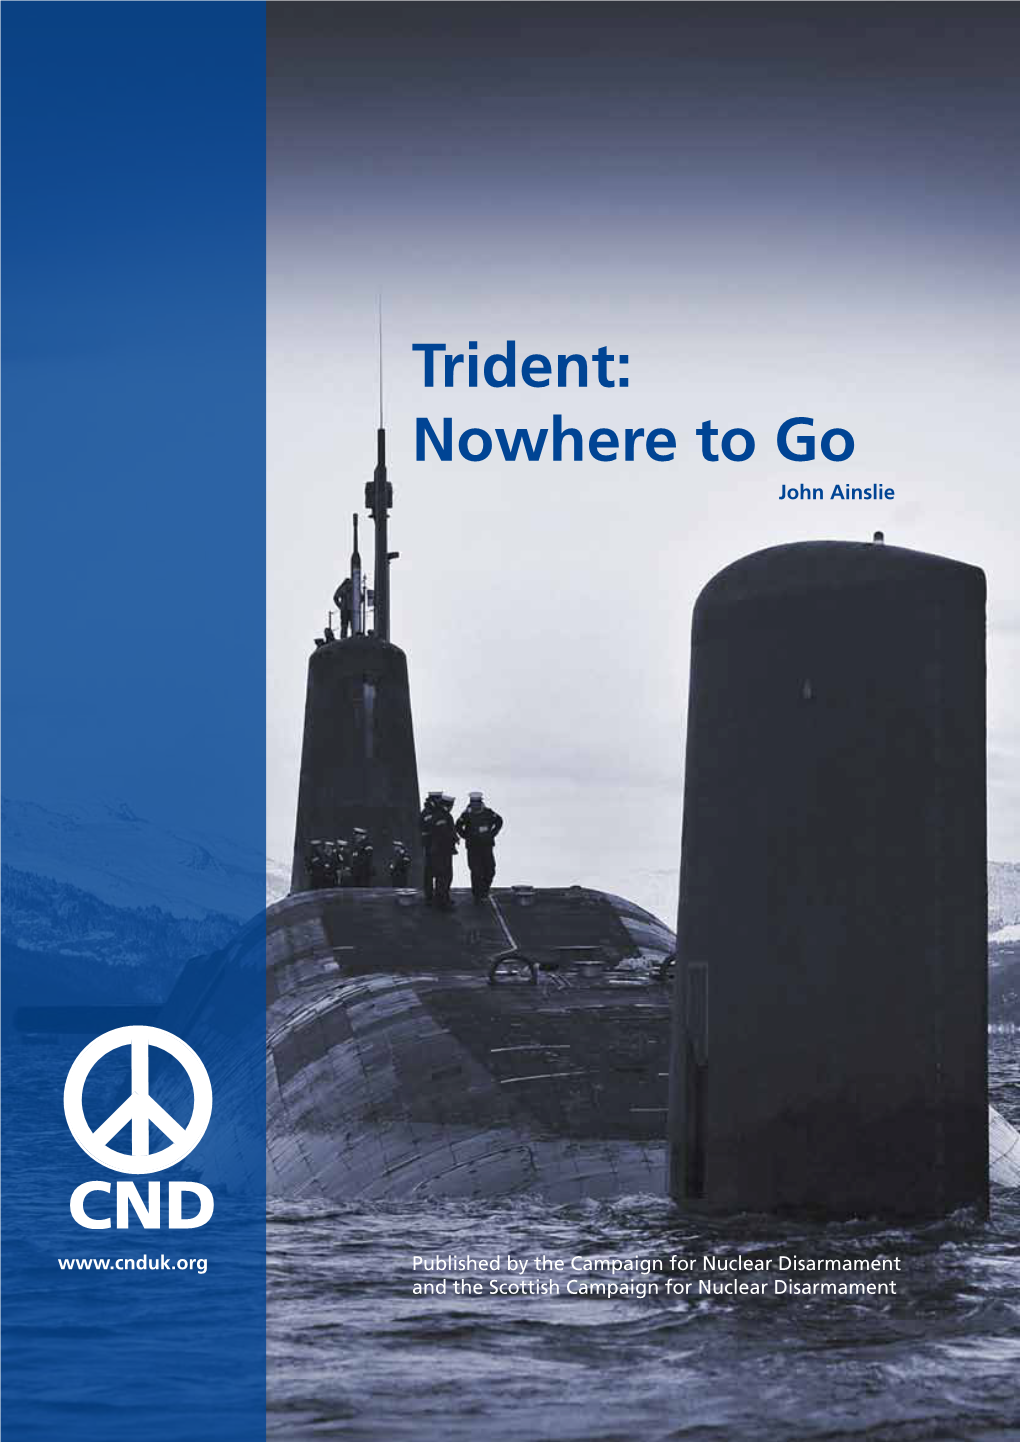 Trident: Nowhere to Go